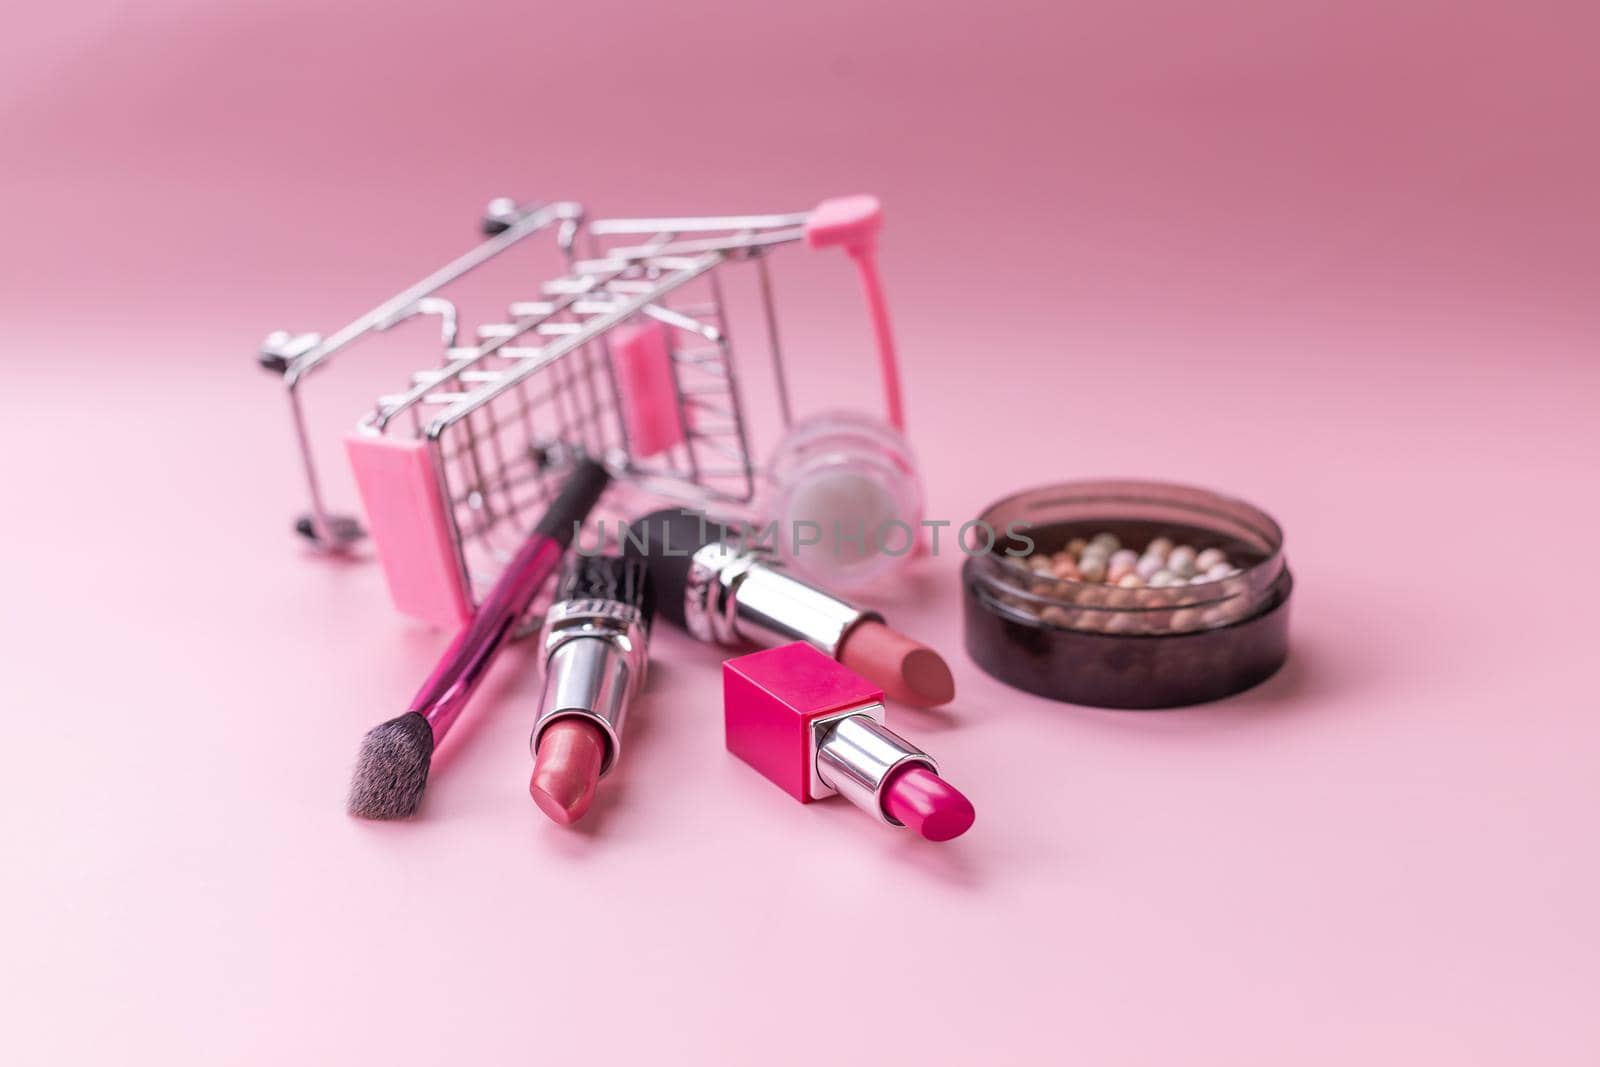 Creative concept with shopping trolley with makeup on a pink background.